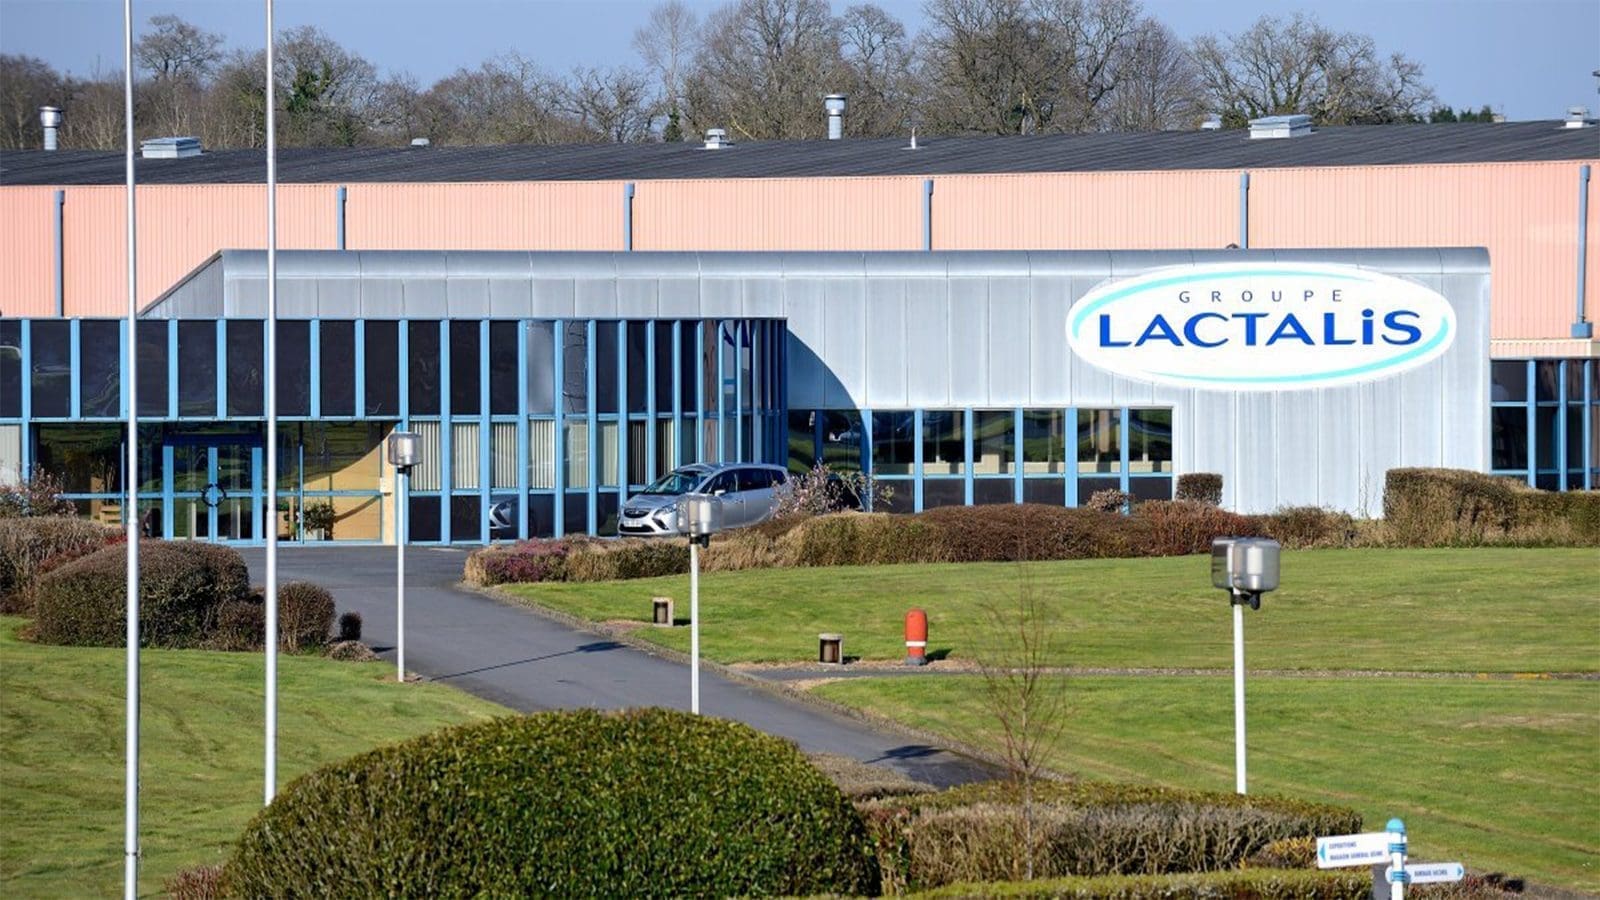 Lactalis sued over 2017 Salmonella outbreak linked to its infant formula